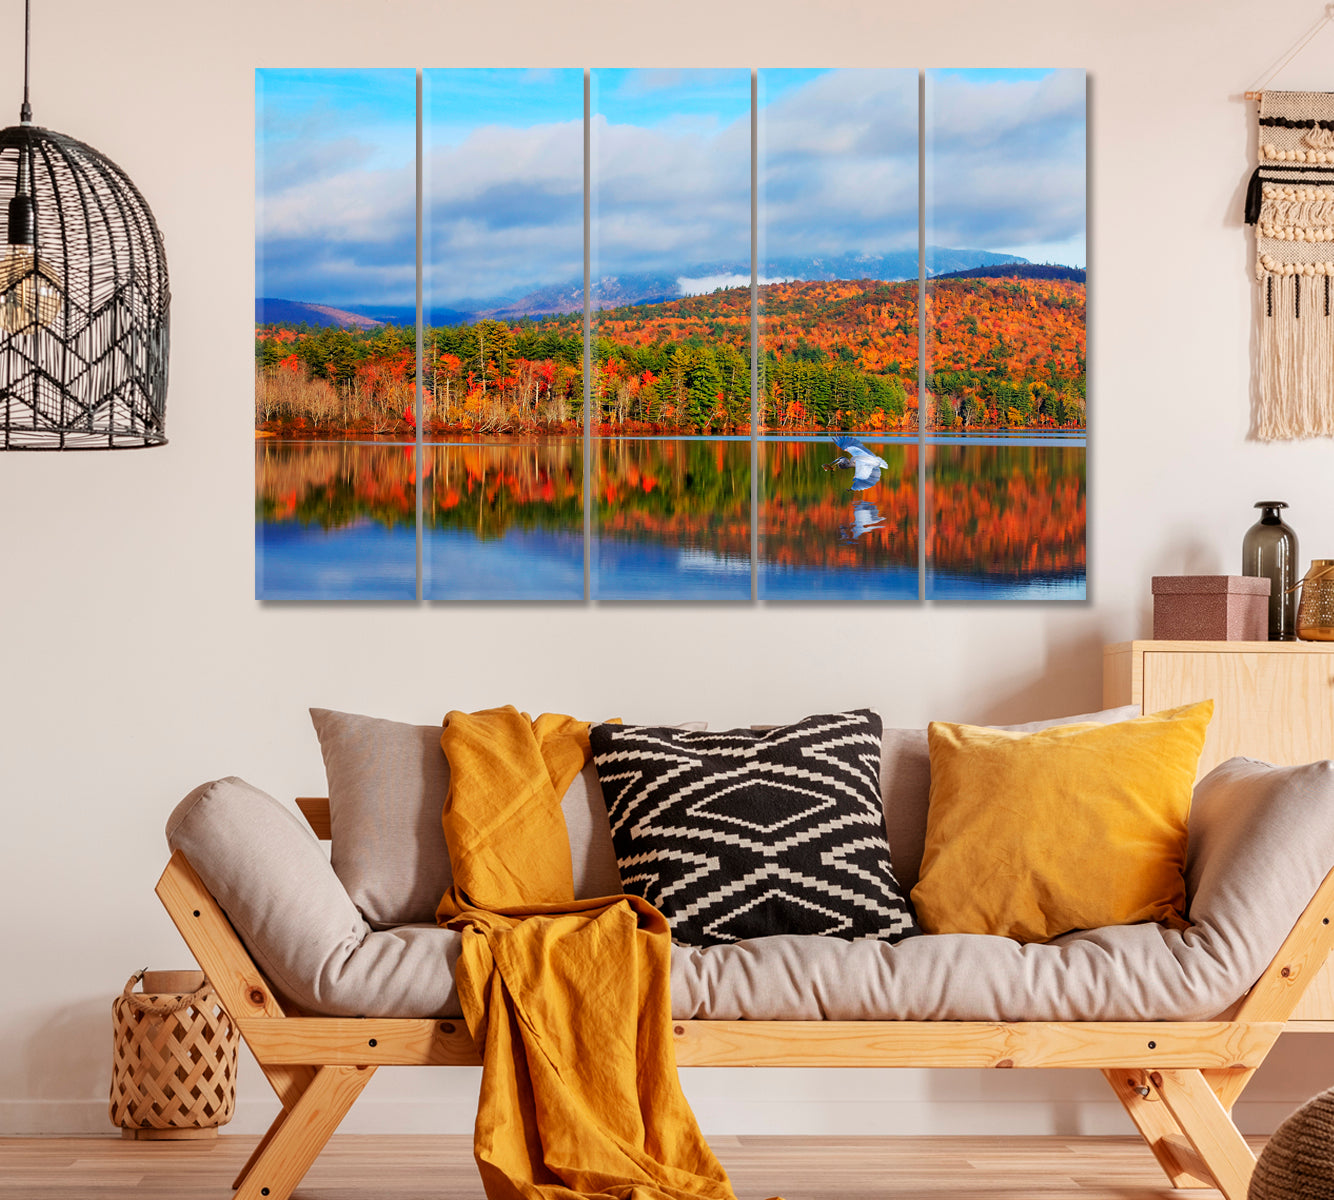 New Hampshire White Mountains Canvas Print ArtLexy 5 Panels 36"x24" inches 